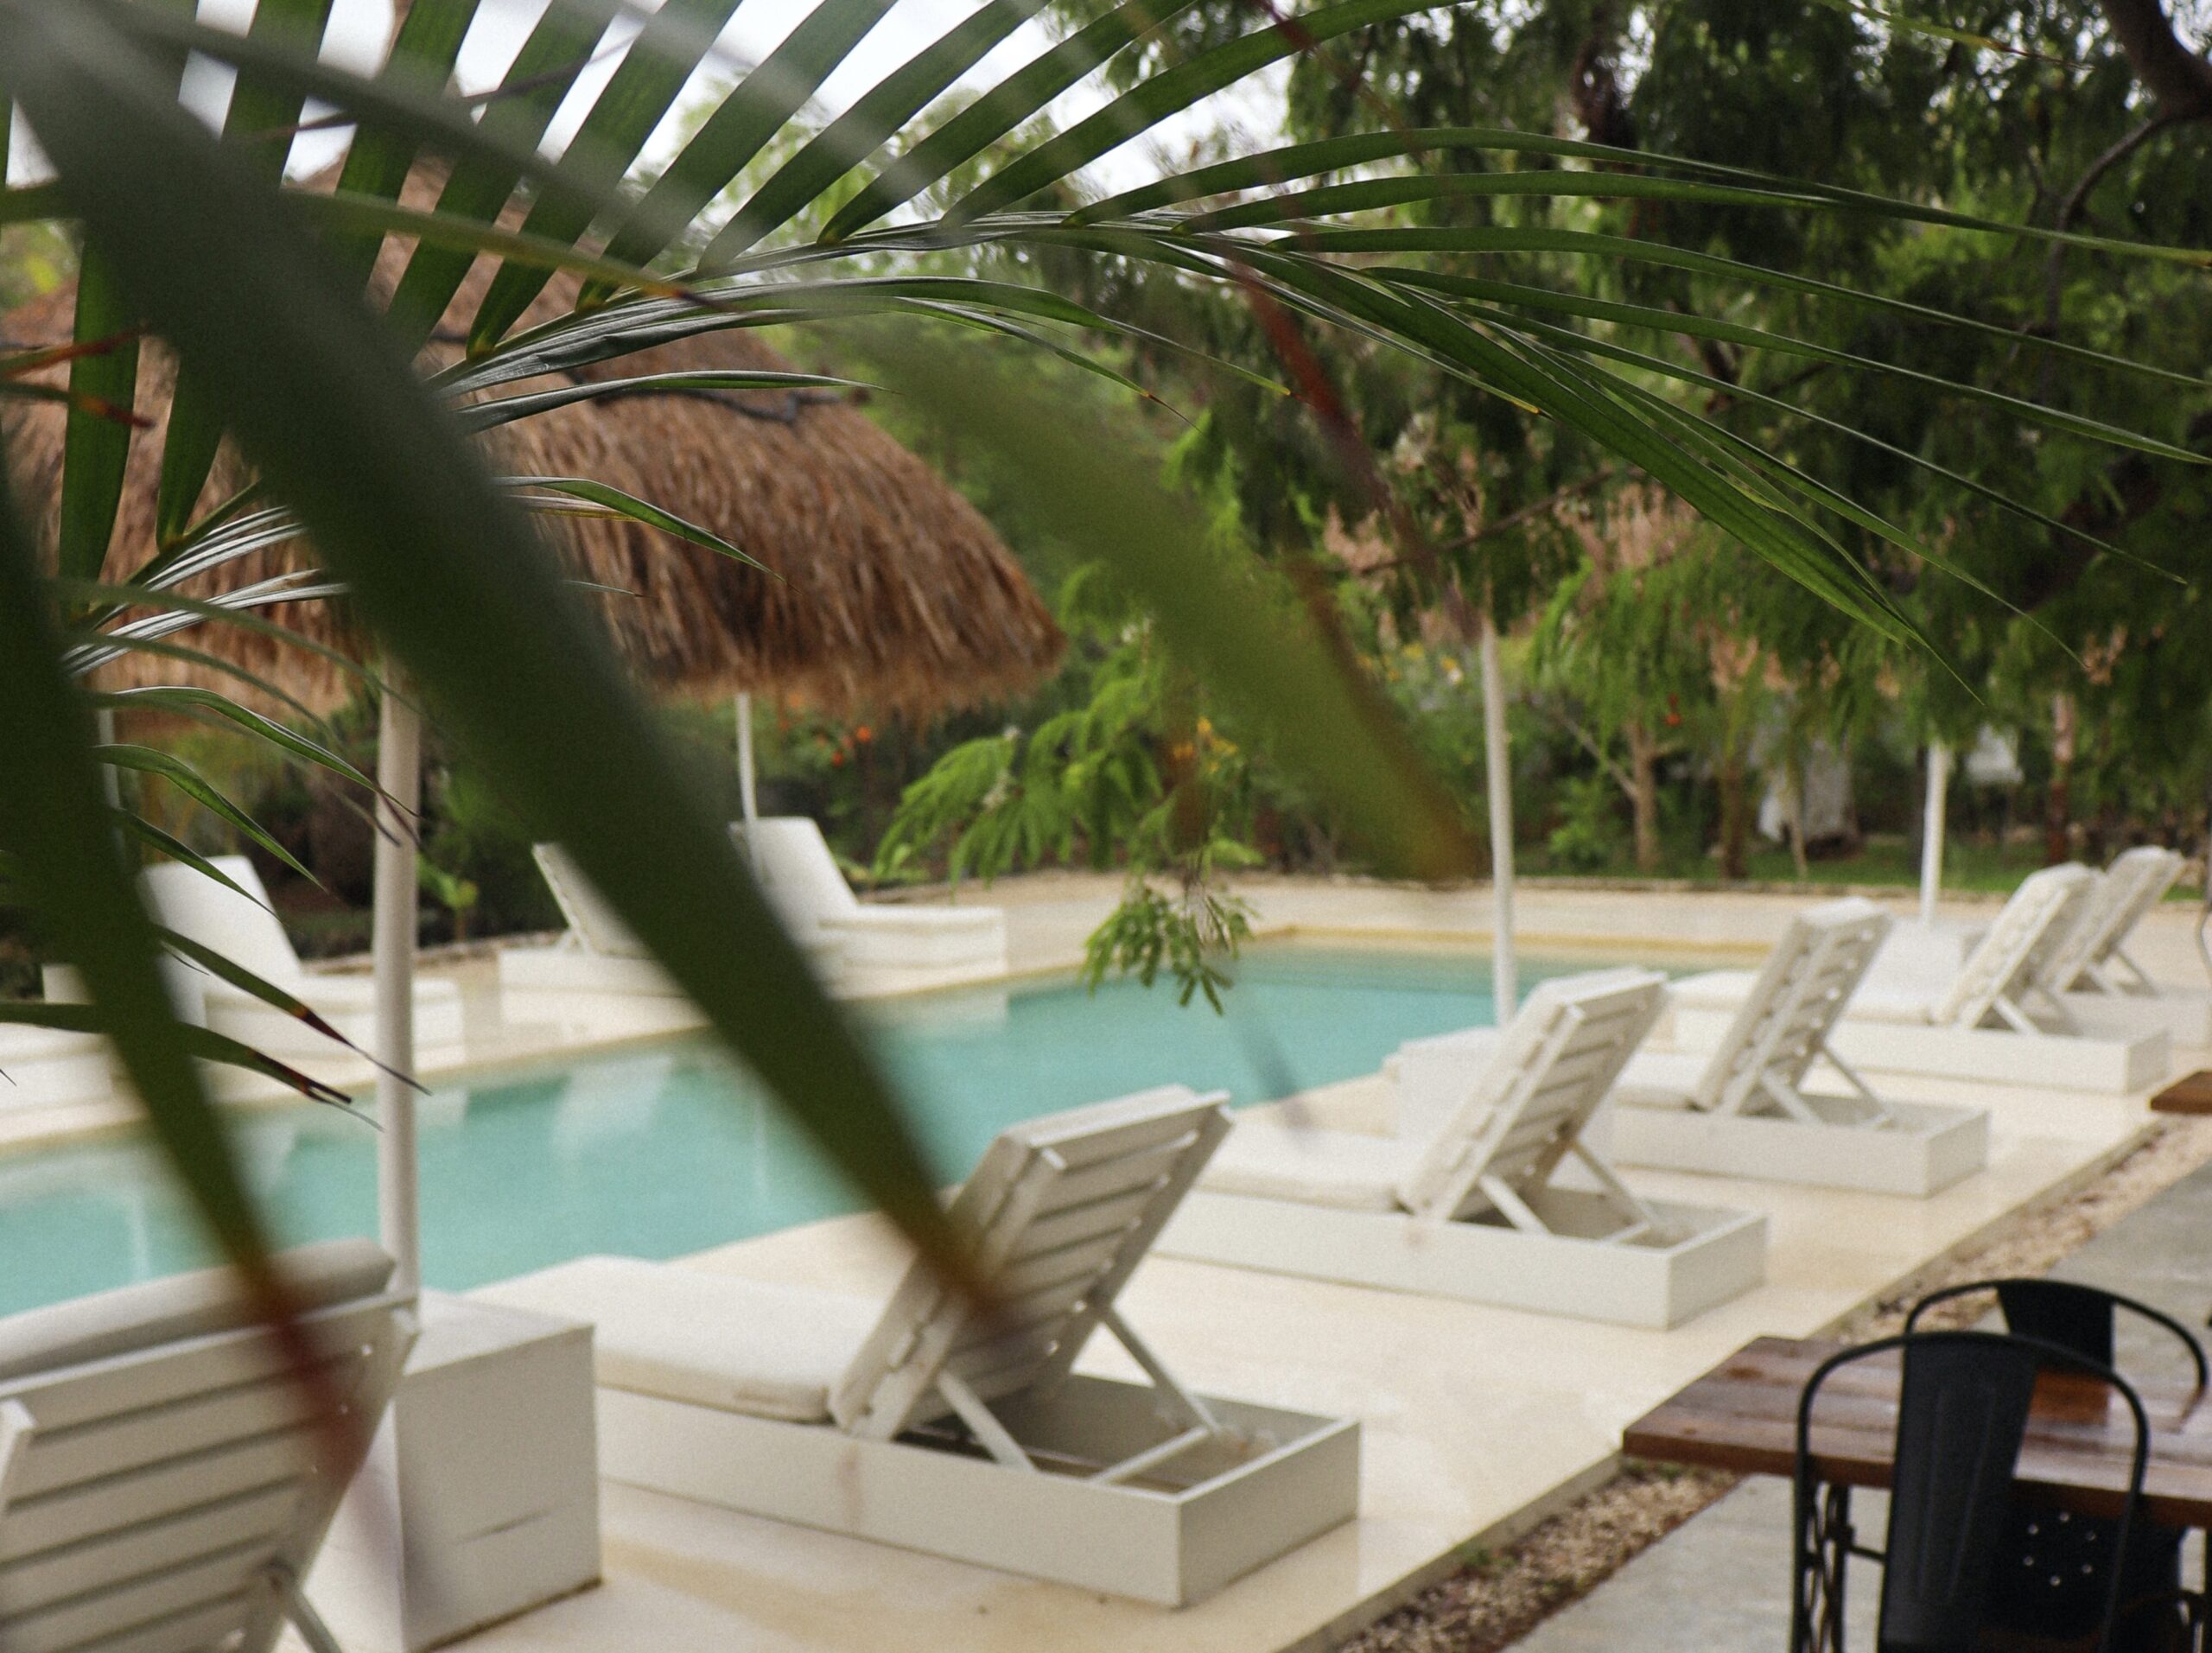 The royal suites in Tulum are a top resort that offers all-inclusive packages. 
Pictured: a pool side view of a resort in Tulum with lush trees 